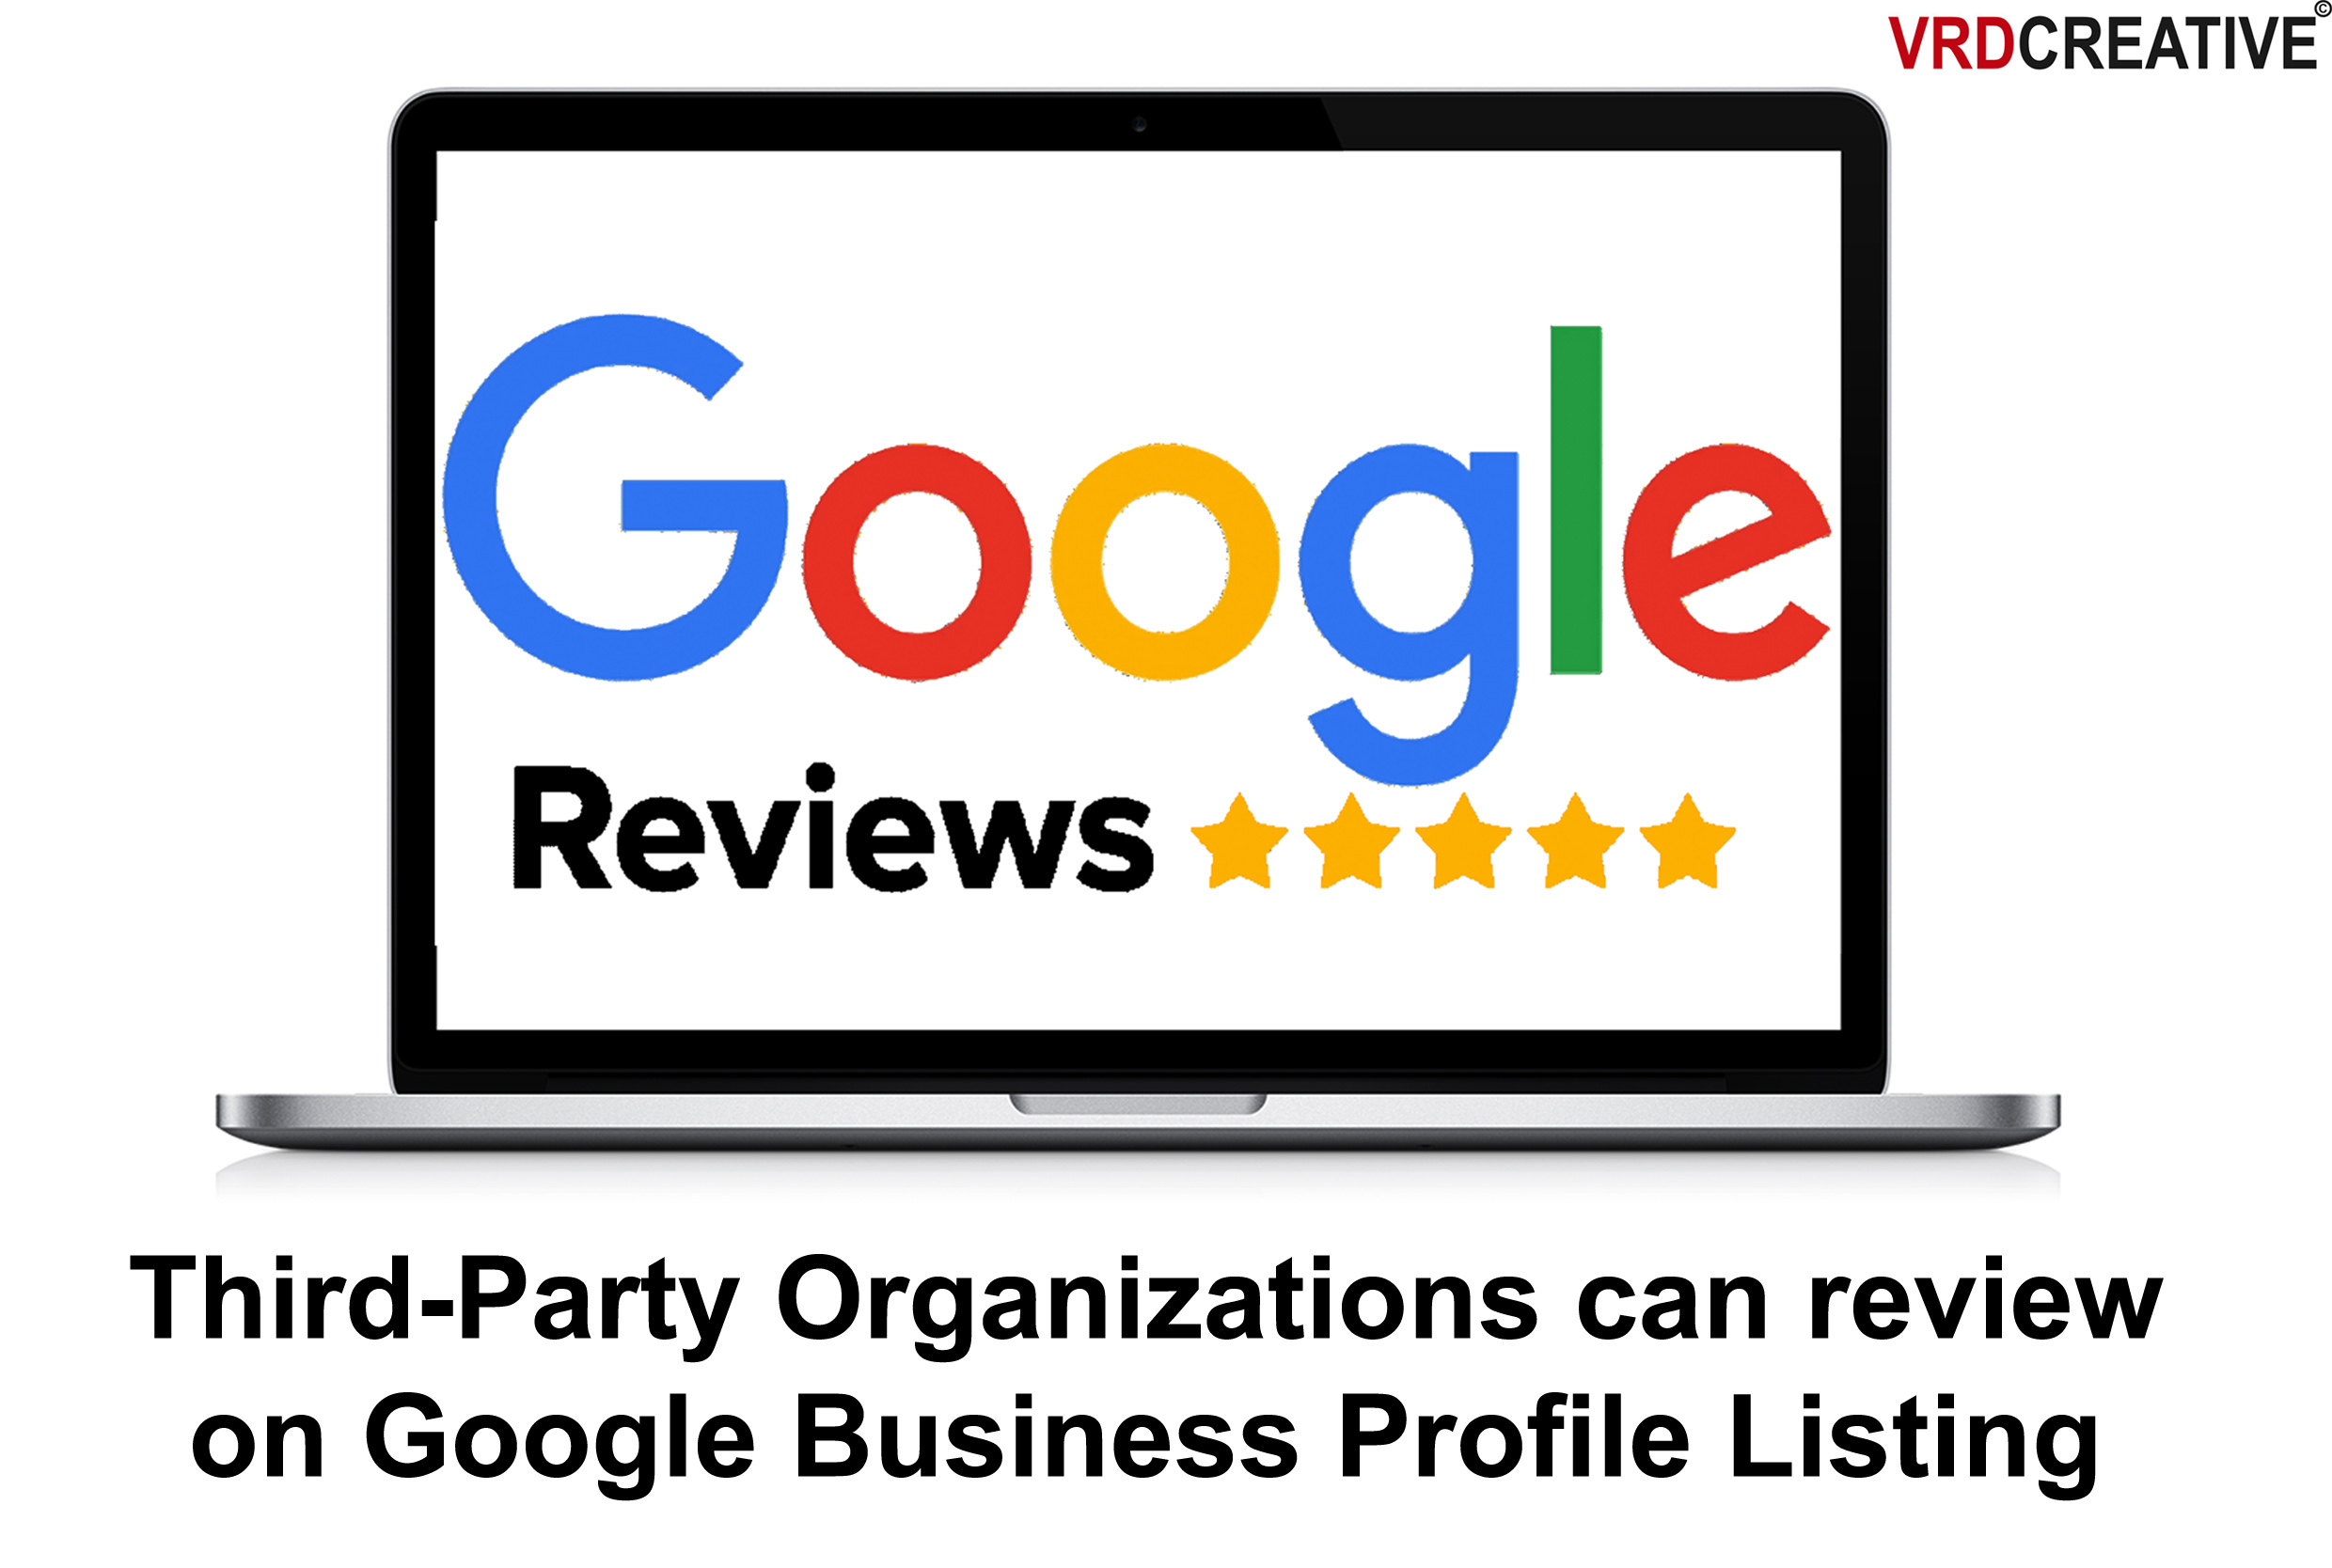 Third-Party Organizations can review on Google Business Profile Listing